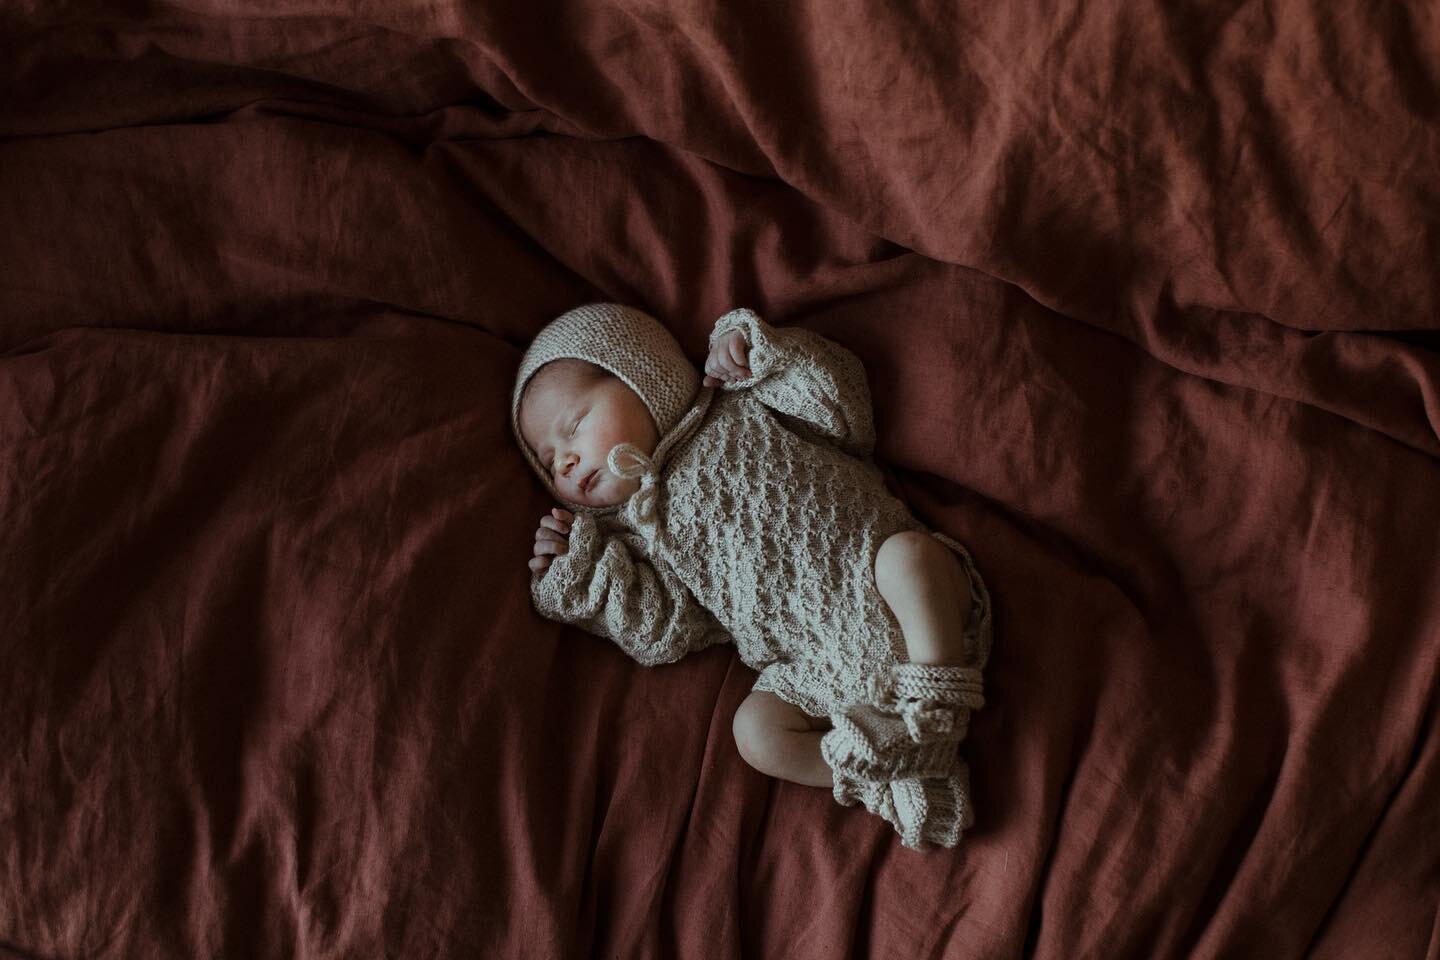 It was you all along, our sweet baby boy, August &lsquo;Augie&rsquo; Wilde Kovacevic.

You landed earthside as the sun rose last Saturday morning, 12 September 2020. 

Being your parents is magical. We feel like we&rsquo;ve experienced something trul